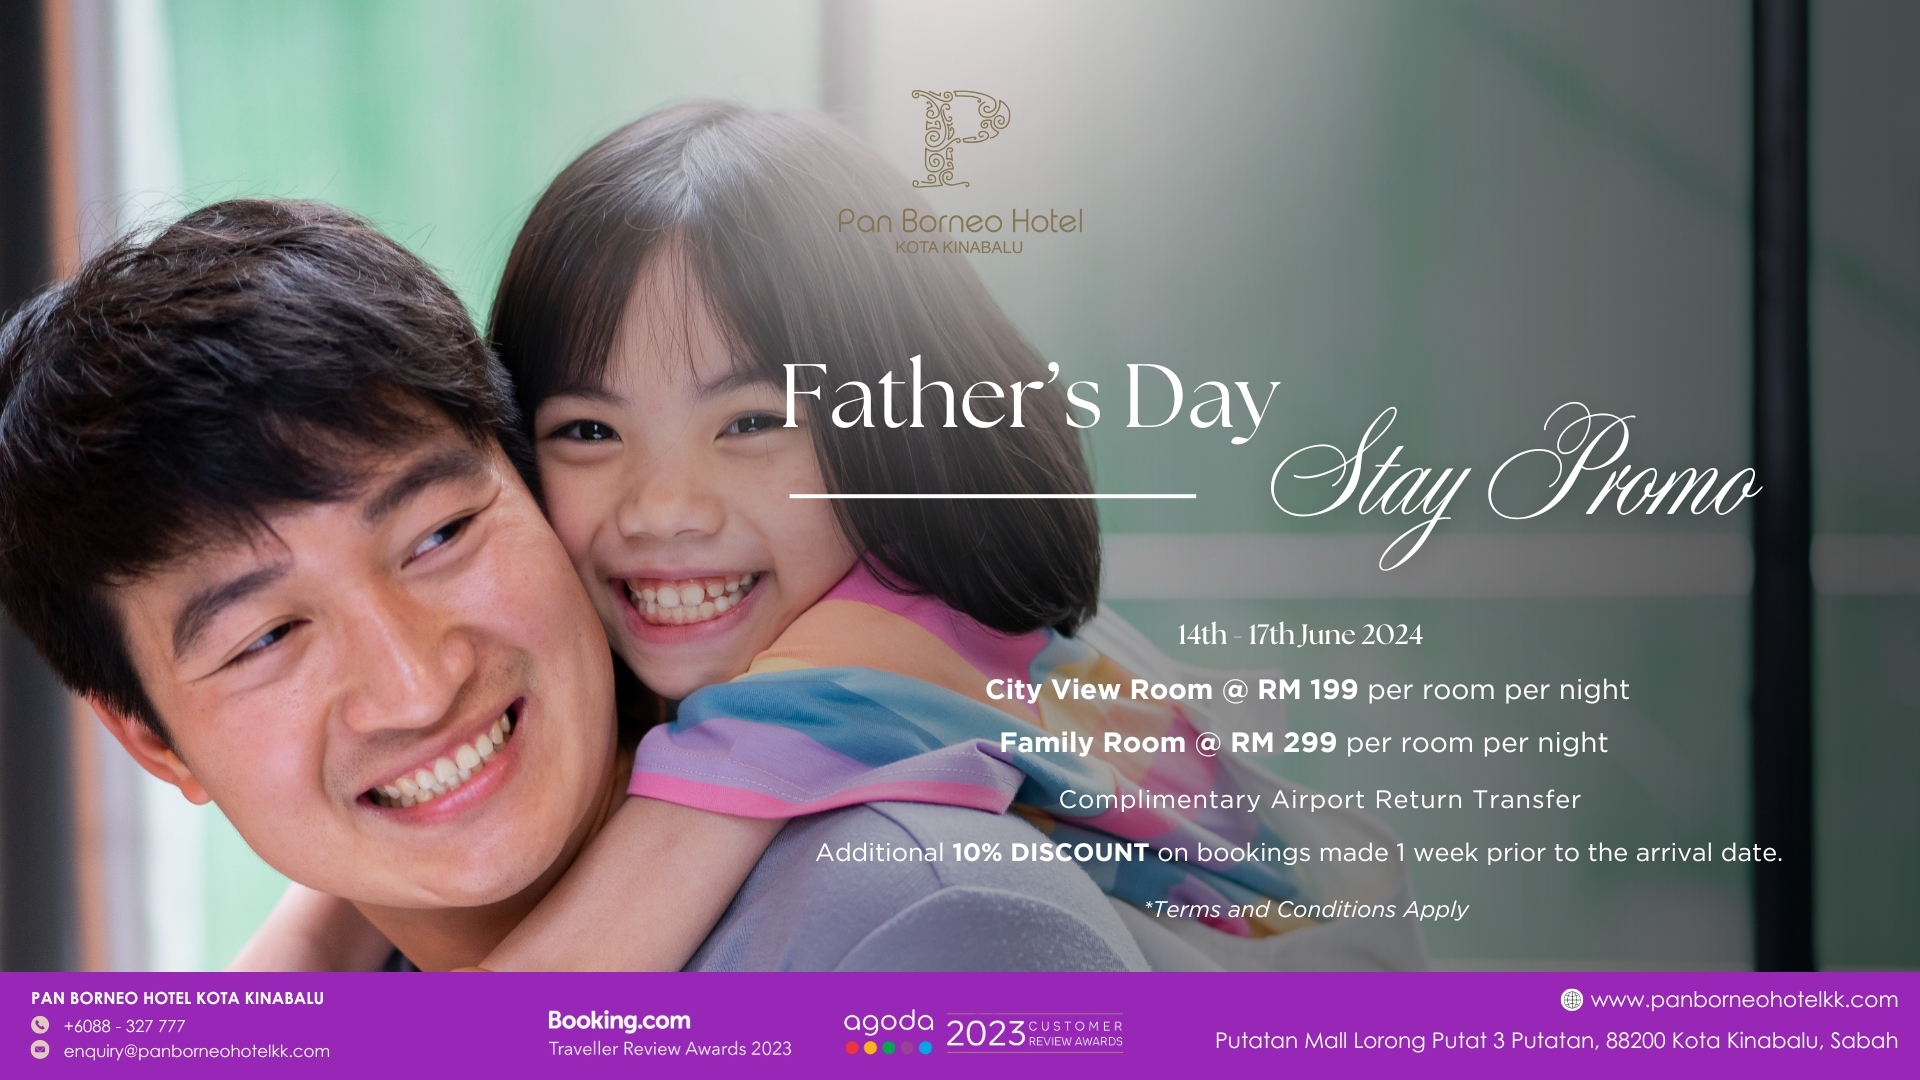 Image of Celebrate Father’s Day with a Special Getaway at Pan Borneo Hotel!